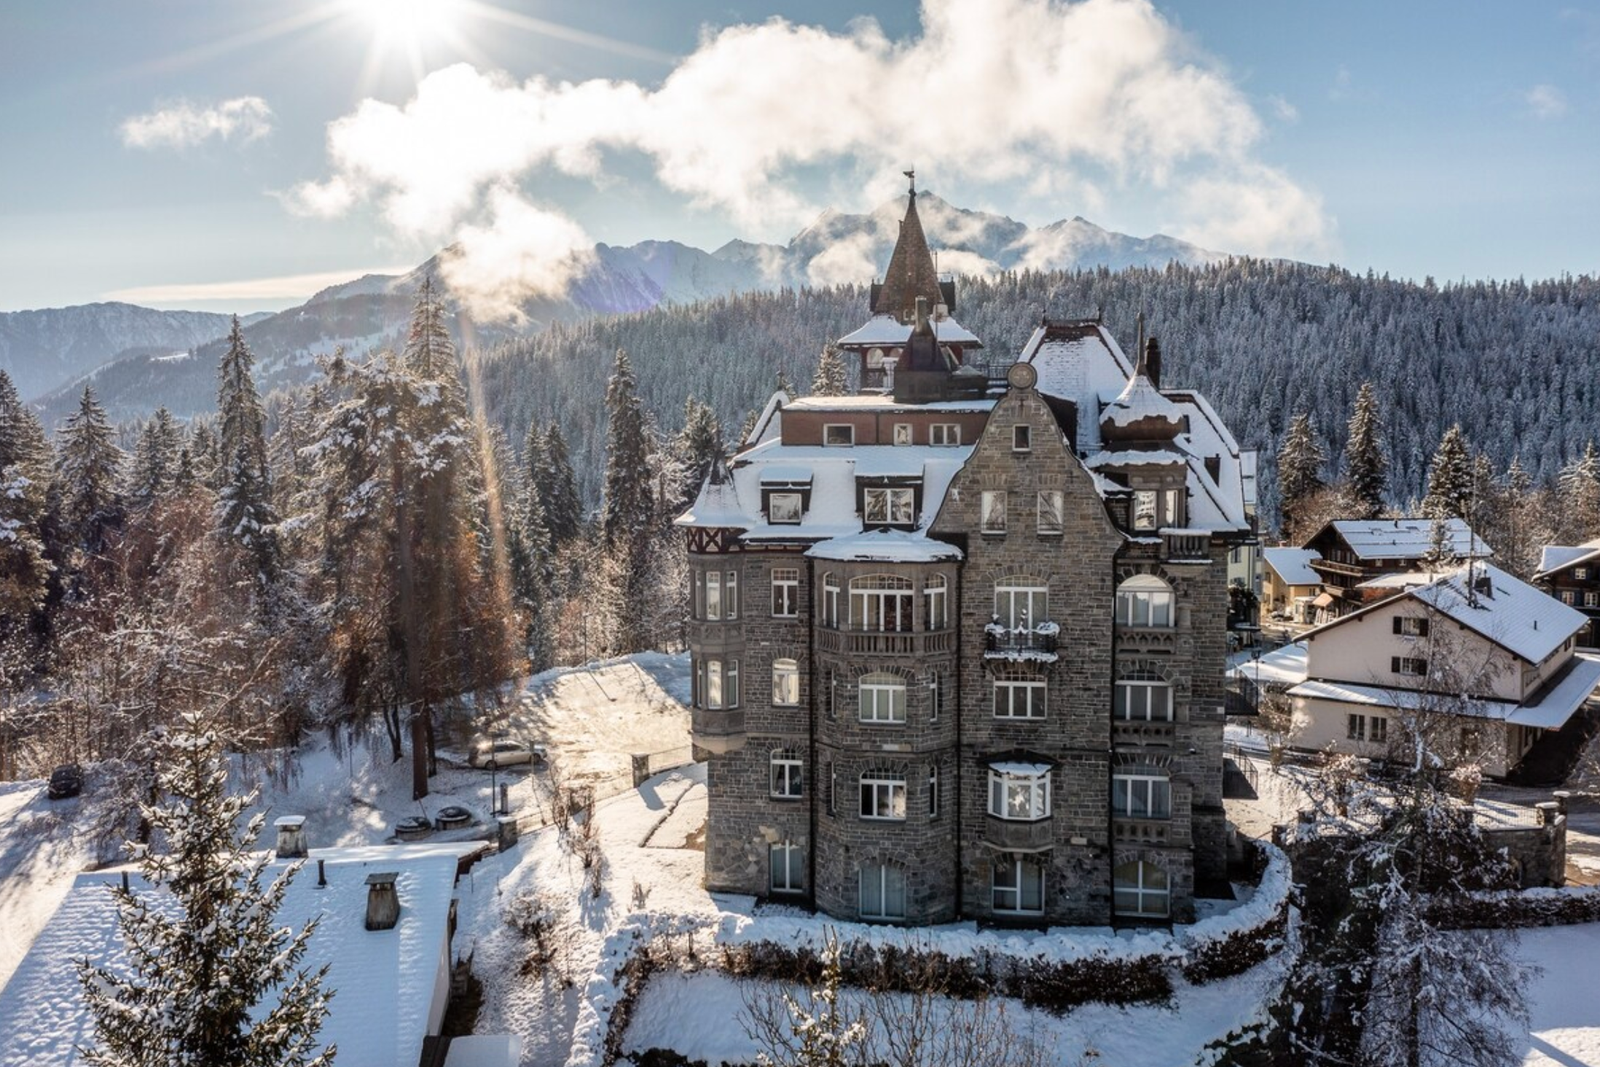 21 Castles You Can Book on Airbnb, From Scotland to Italy